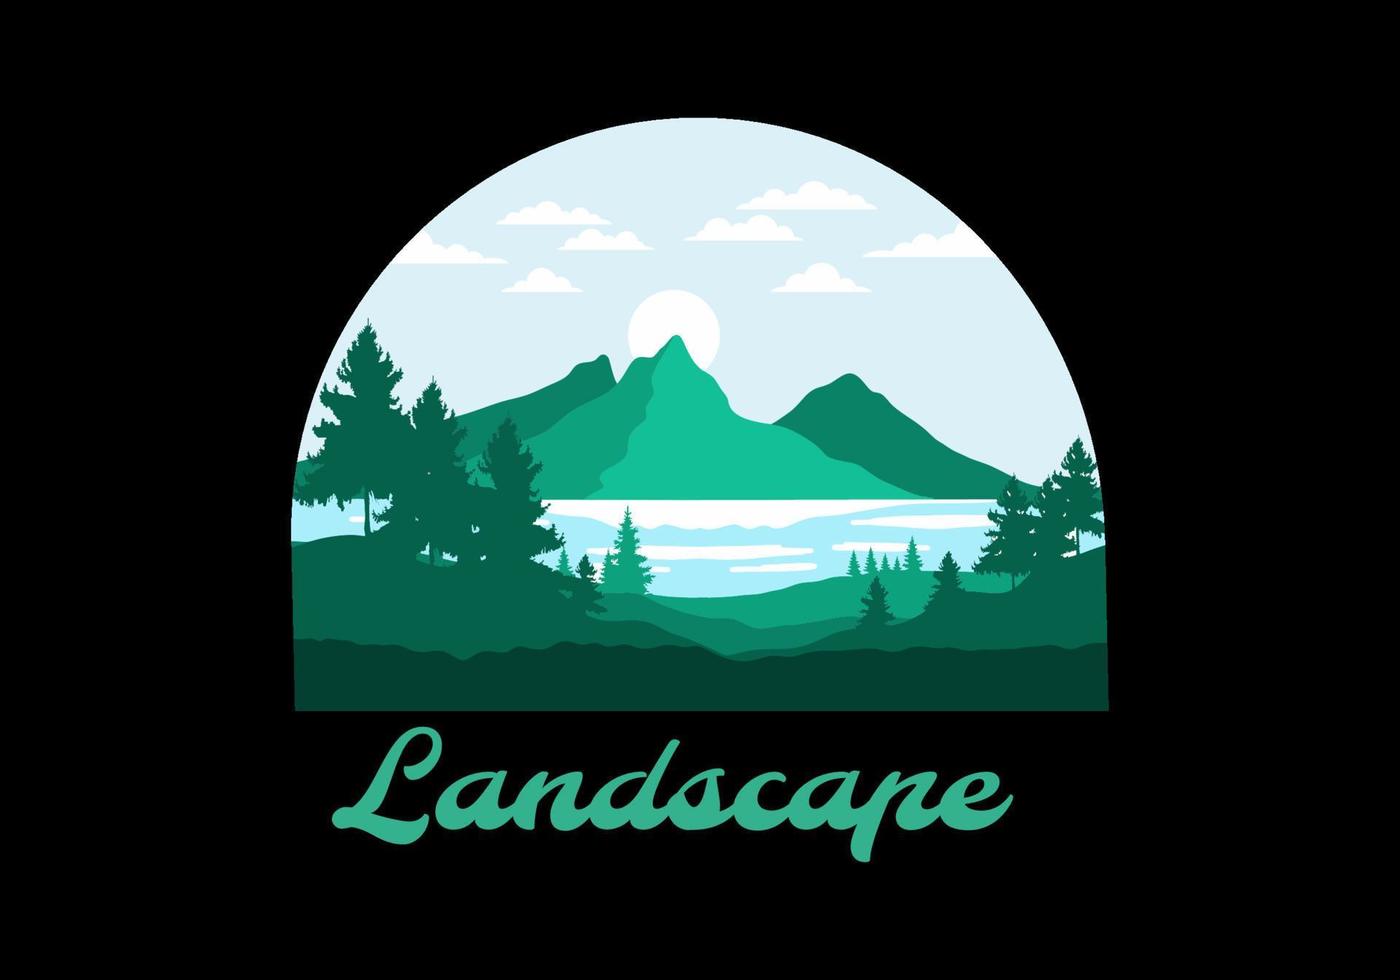 Landscape art illustration of a mountain and lake vector